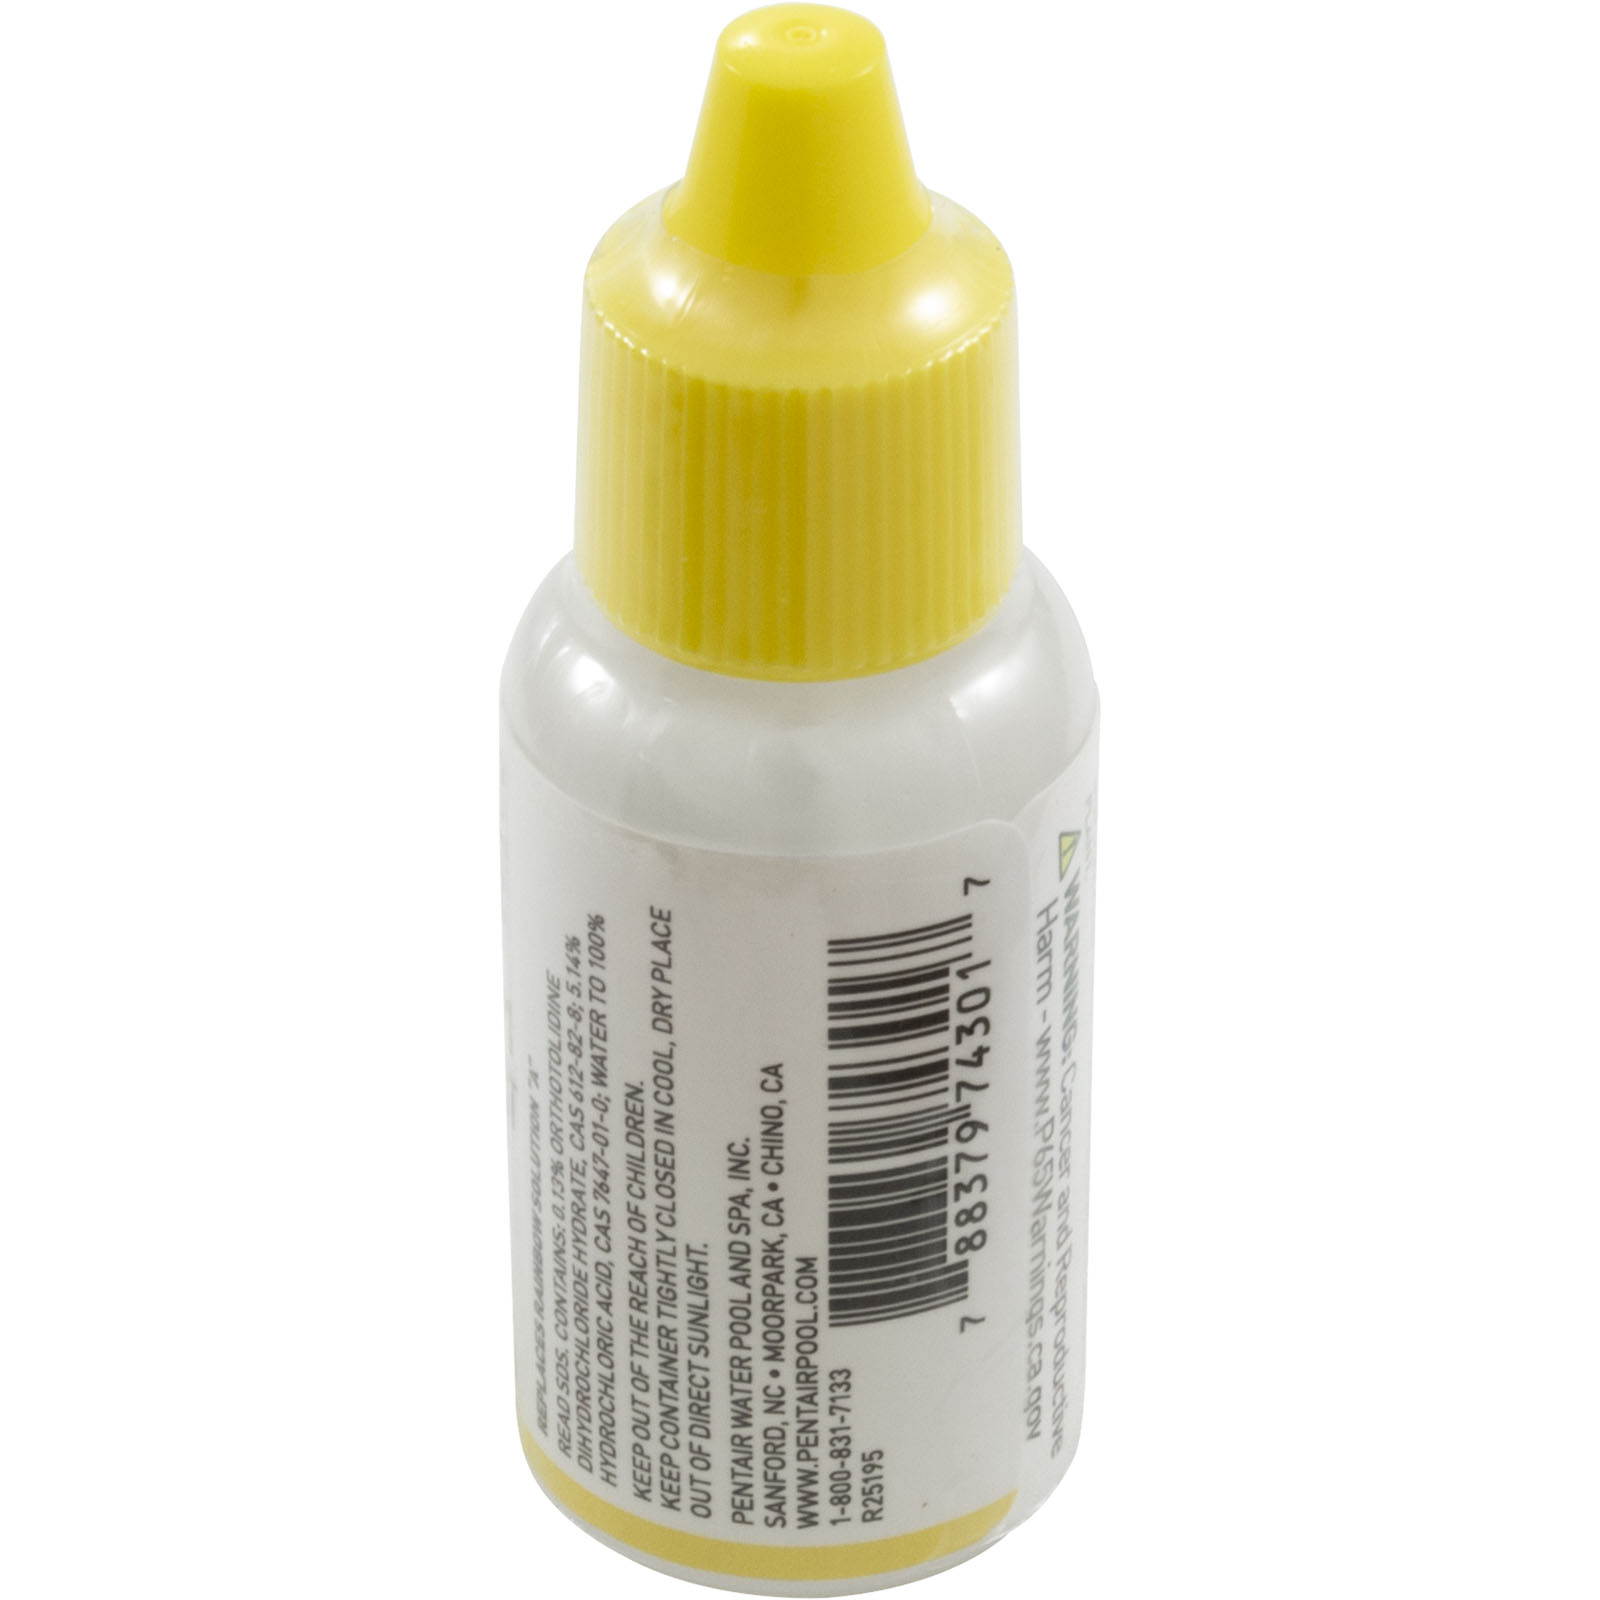 Picture of Test Solution, Pentair OTO, 1/2 Oz. Chlorine, Bromine